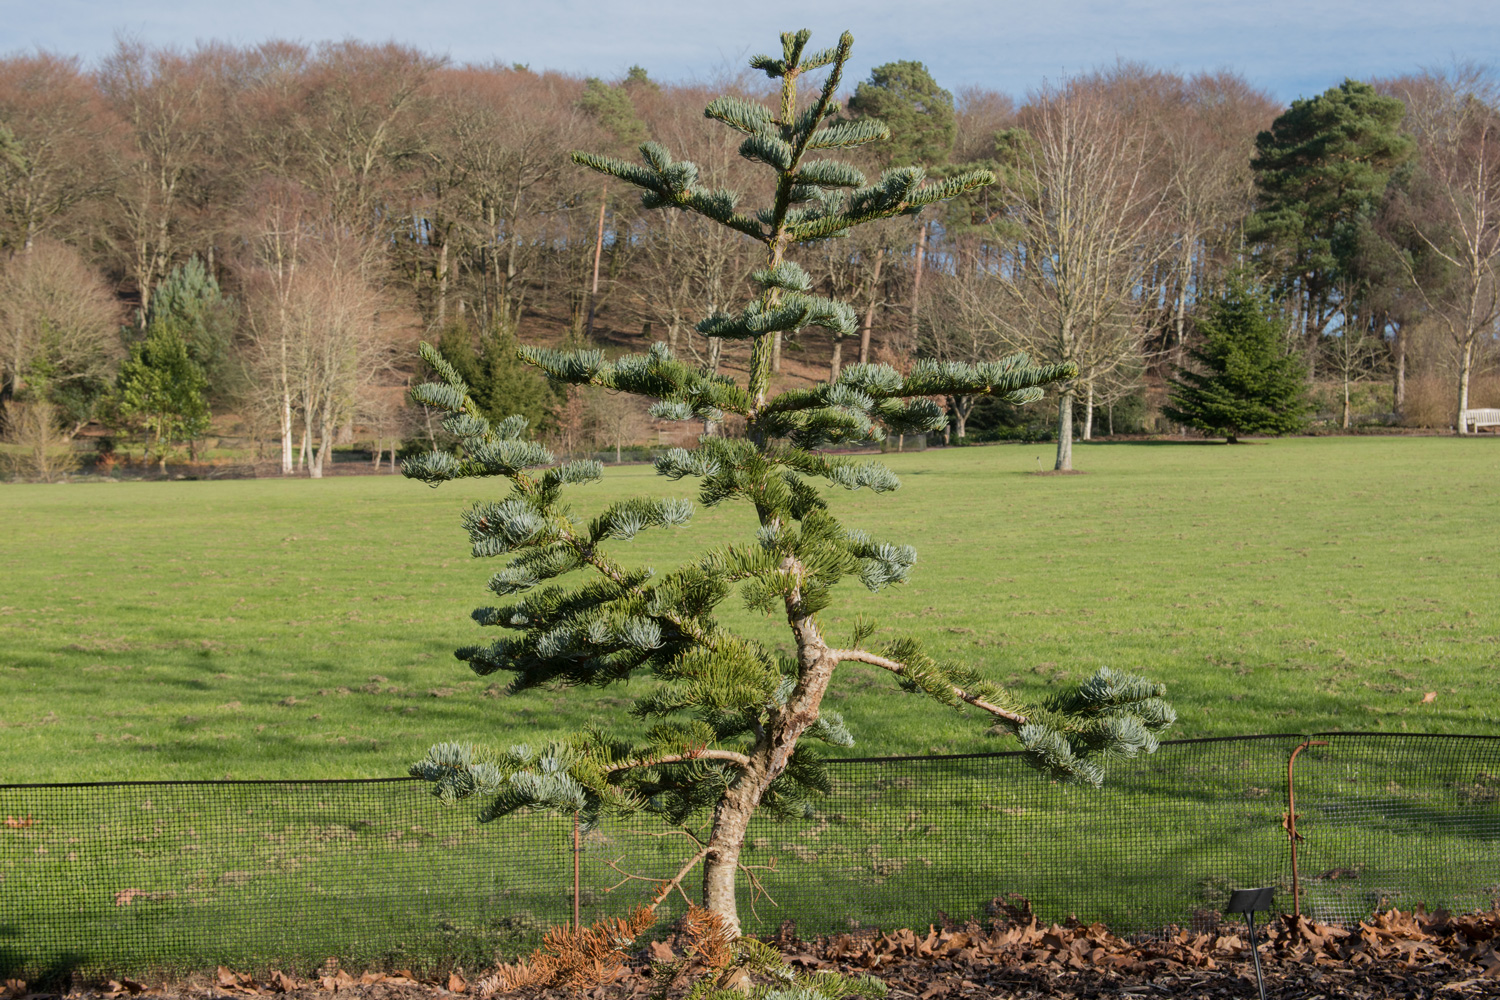 Winter Foliage of an Abies magnifica 'Glauca' (California Red Fir Tree) in a Park in Rural Devon, England, UK